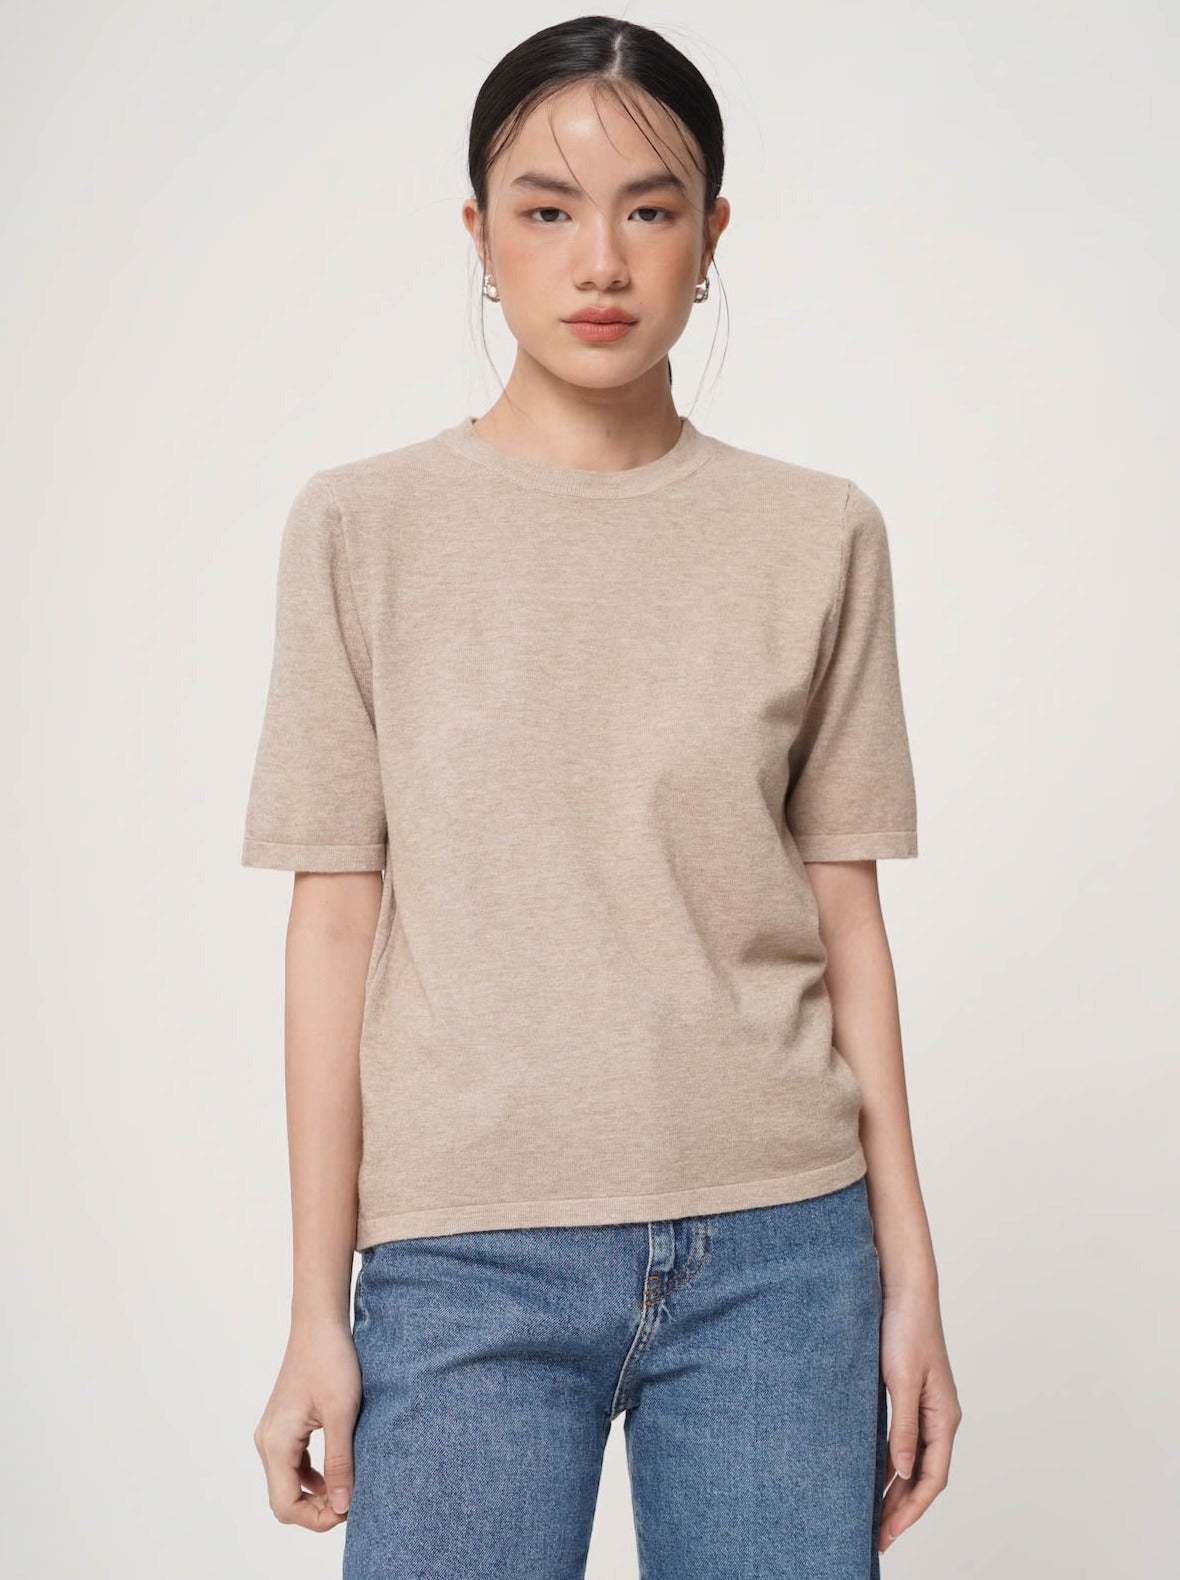 Sumi Top In Taupe